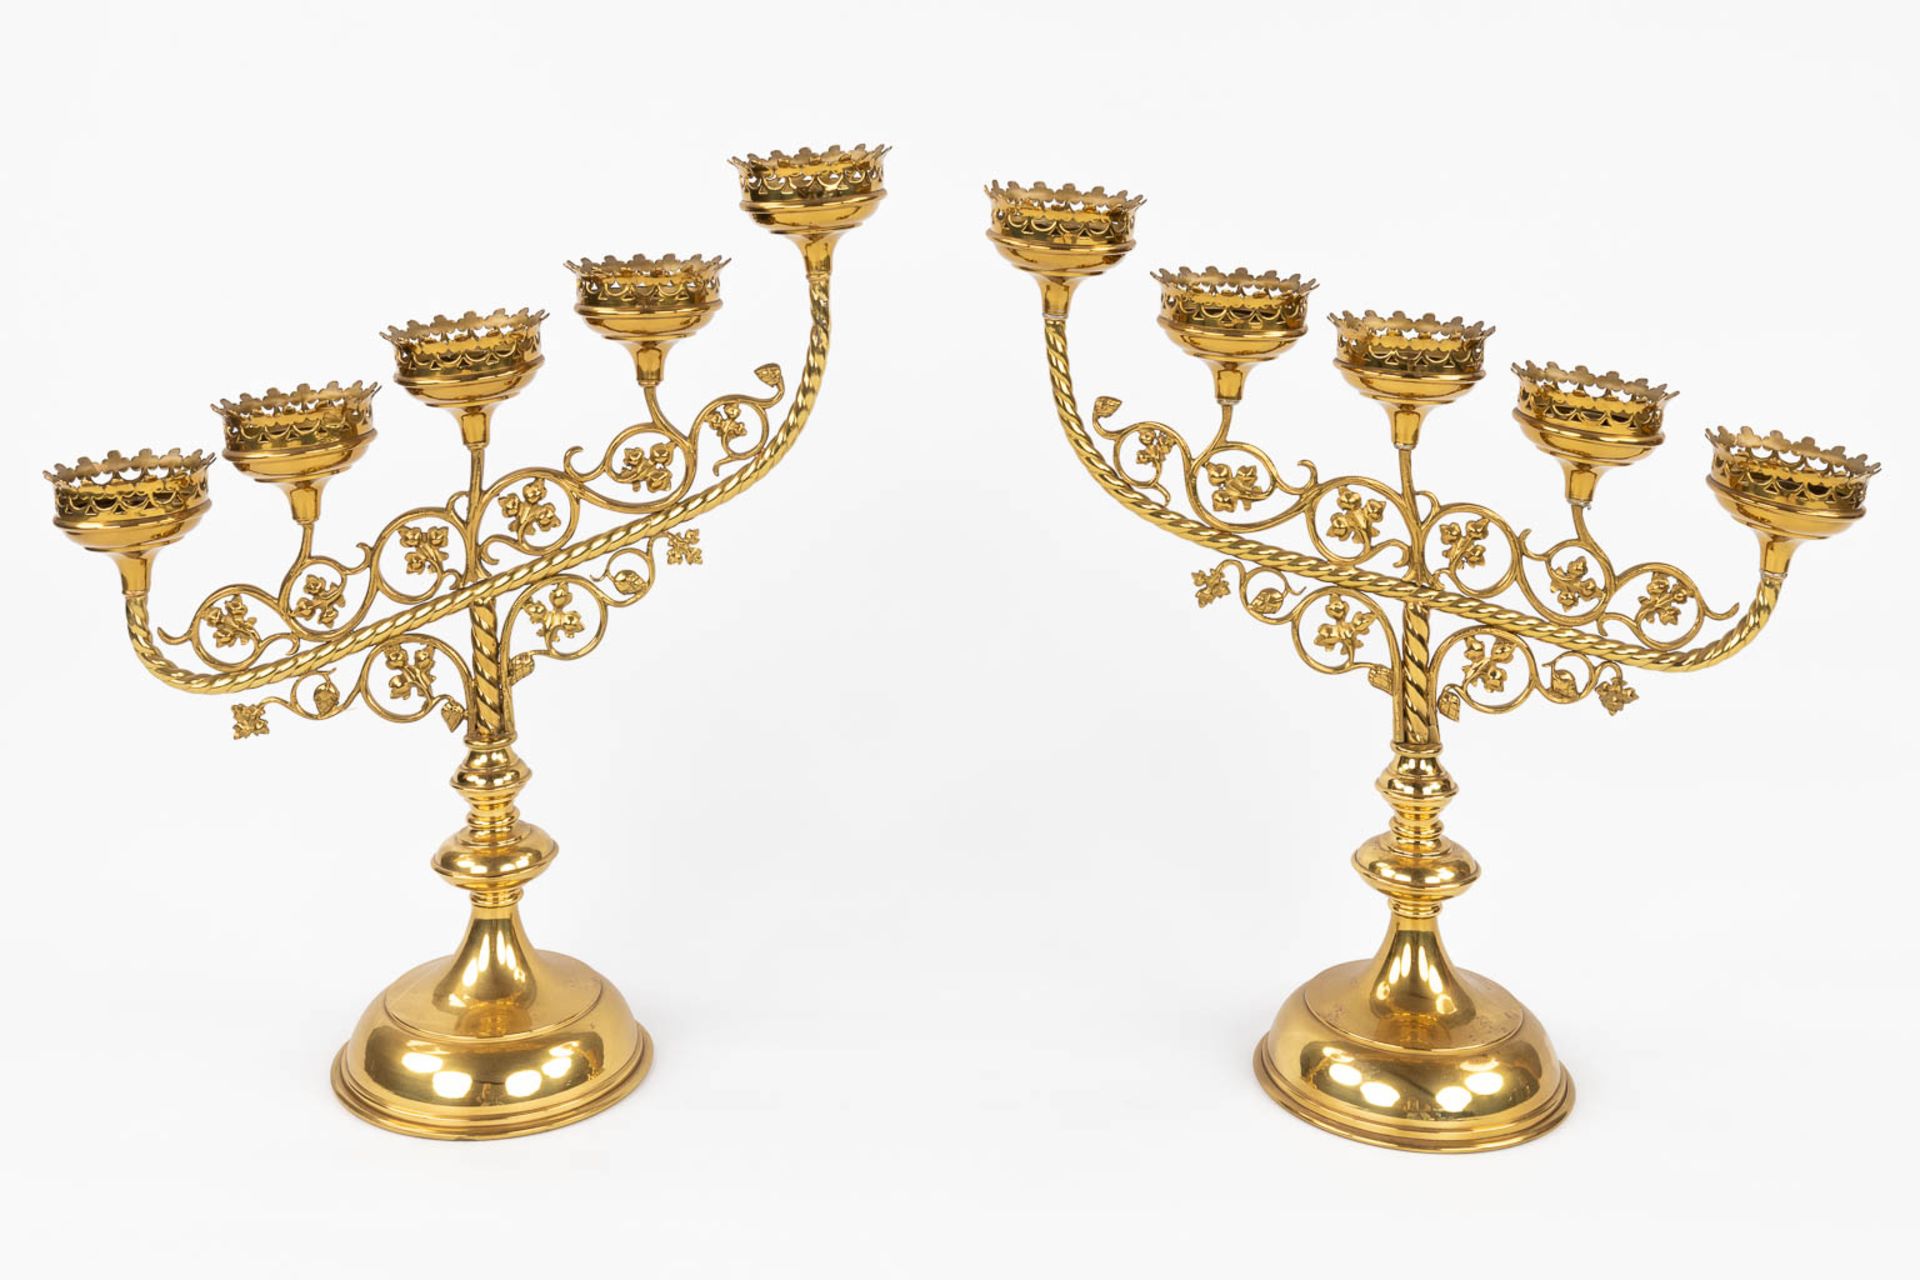 Four Church candlesticks, bronze in a gothic revival style. A pair and two singles. (D:18 x W:51 x H - Image 5 of 18